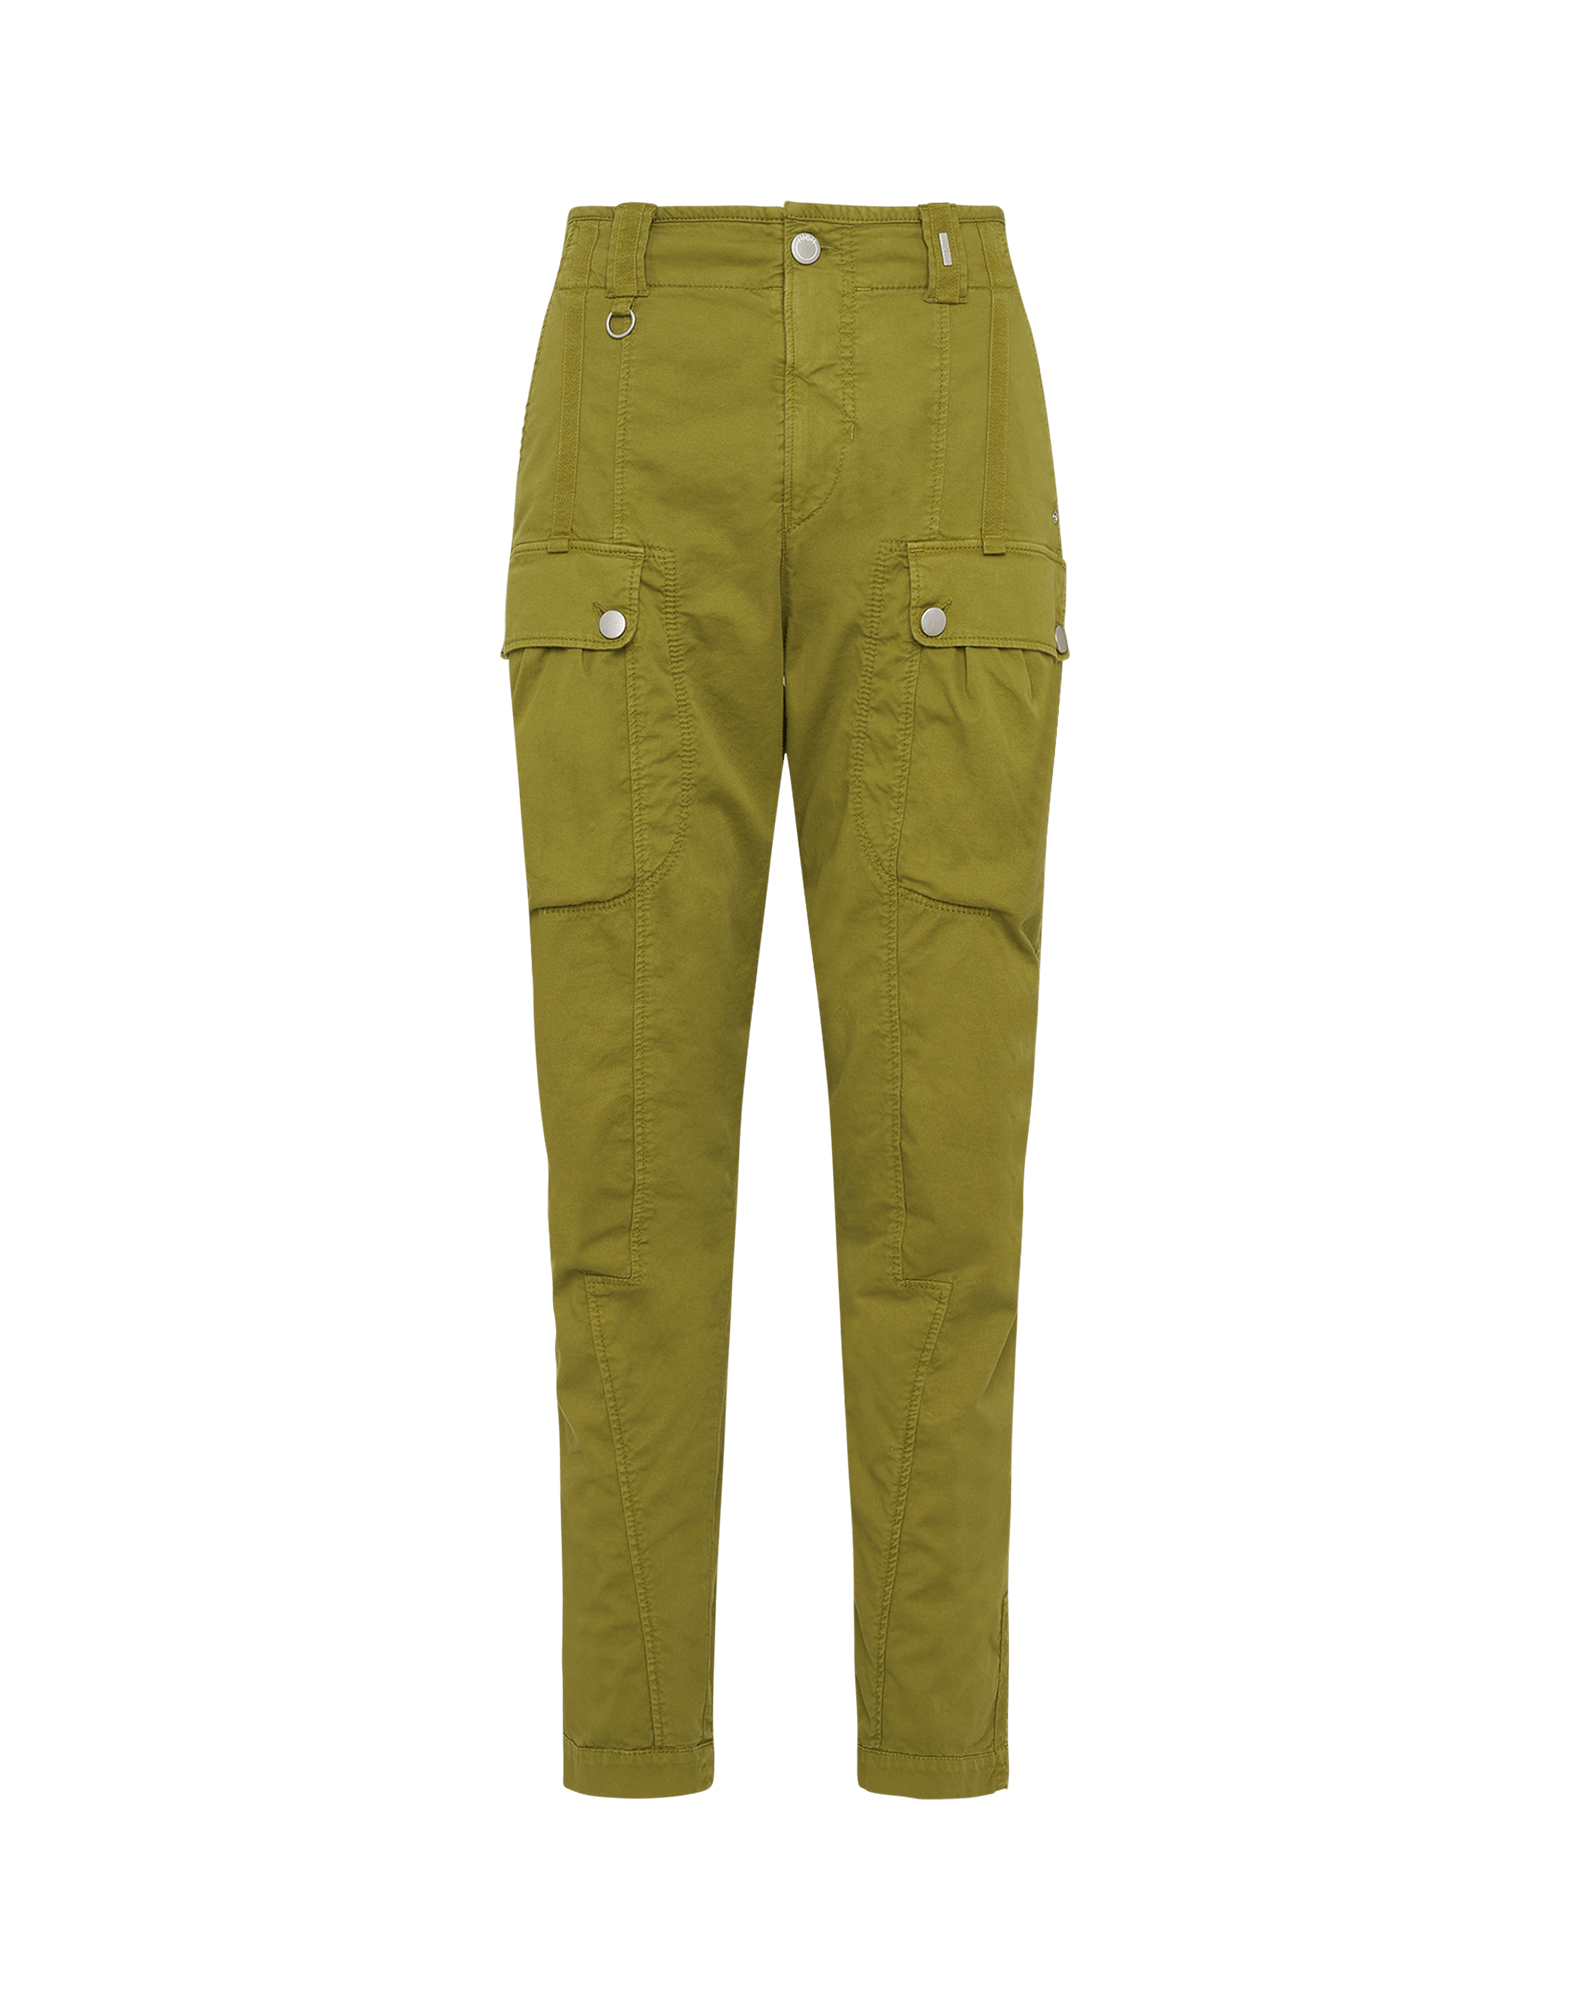 EXPLORE : Green Jodhpur pants in with bellows pockets